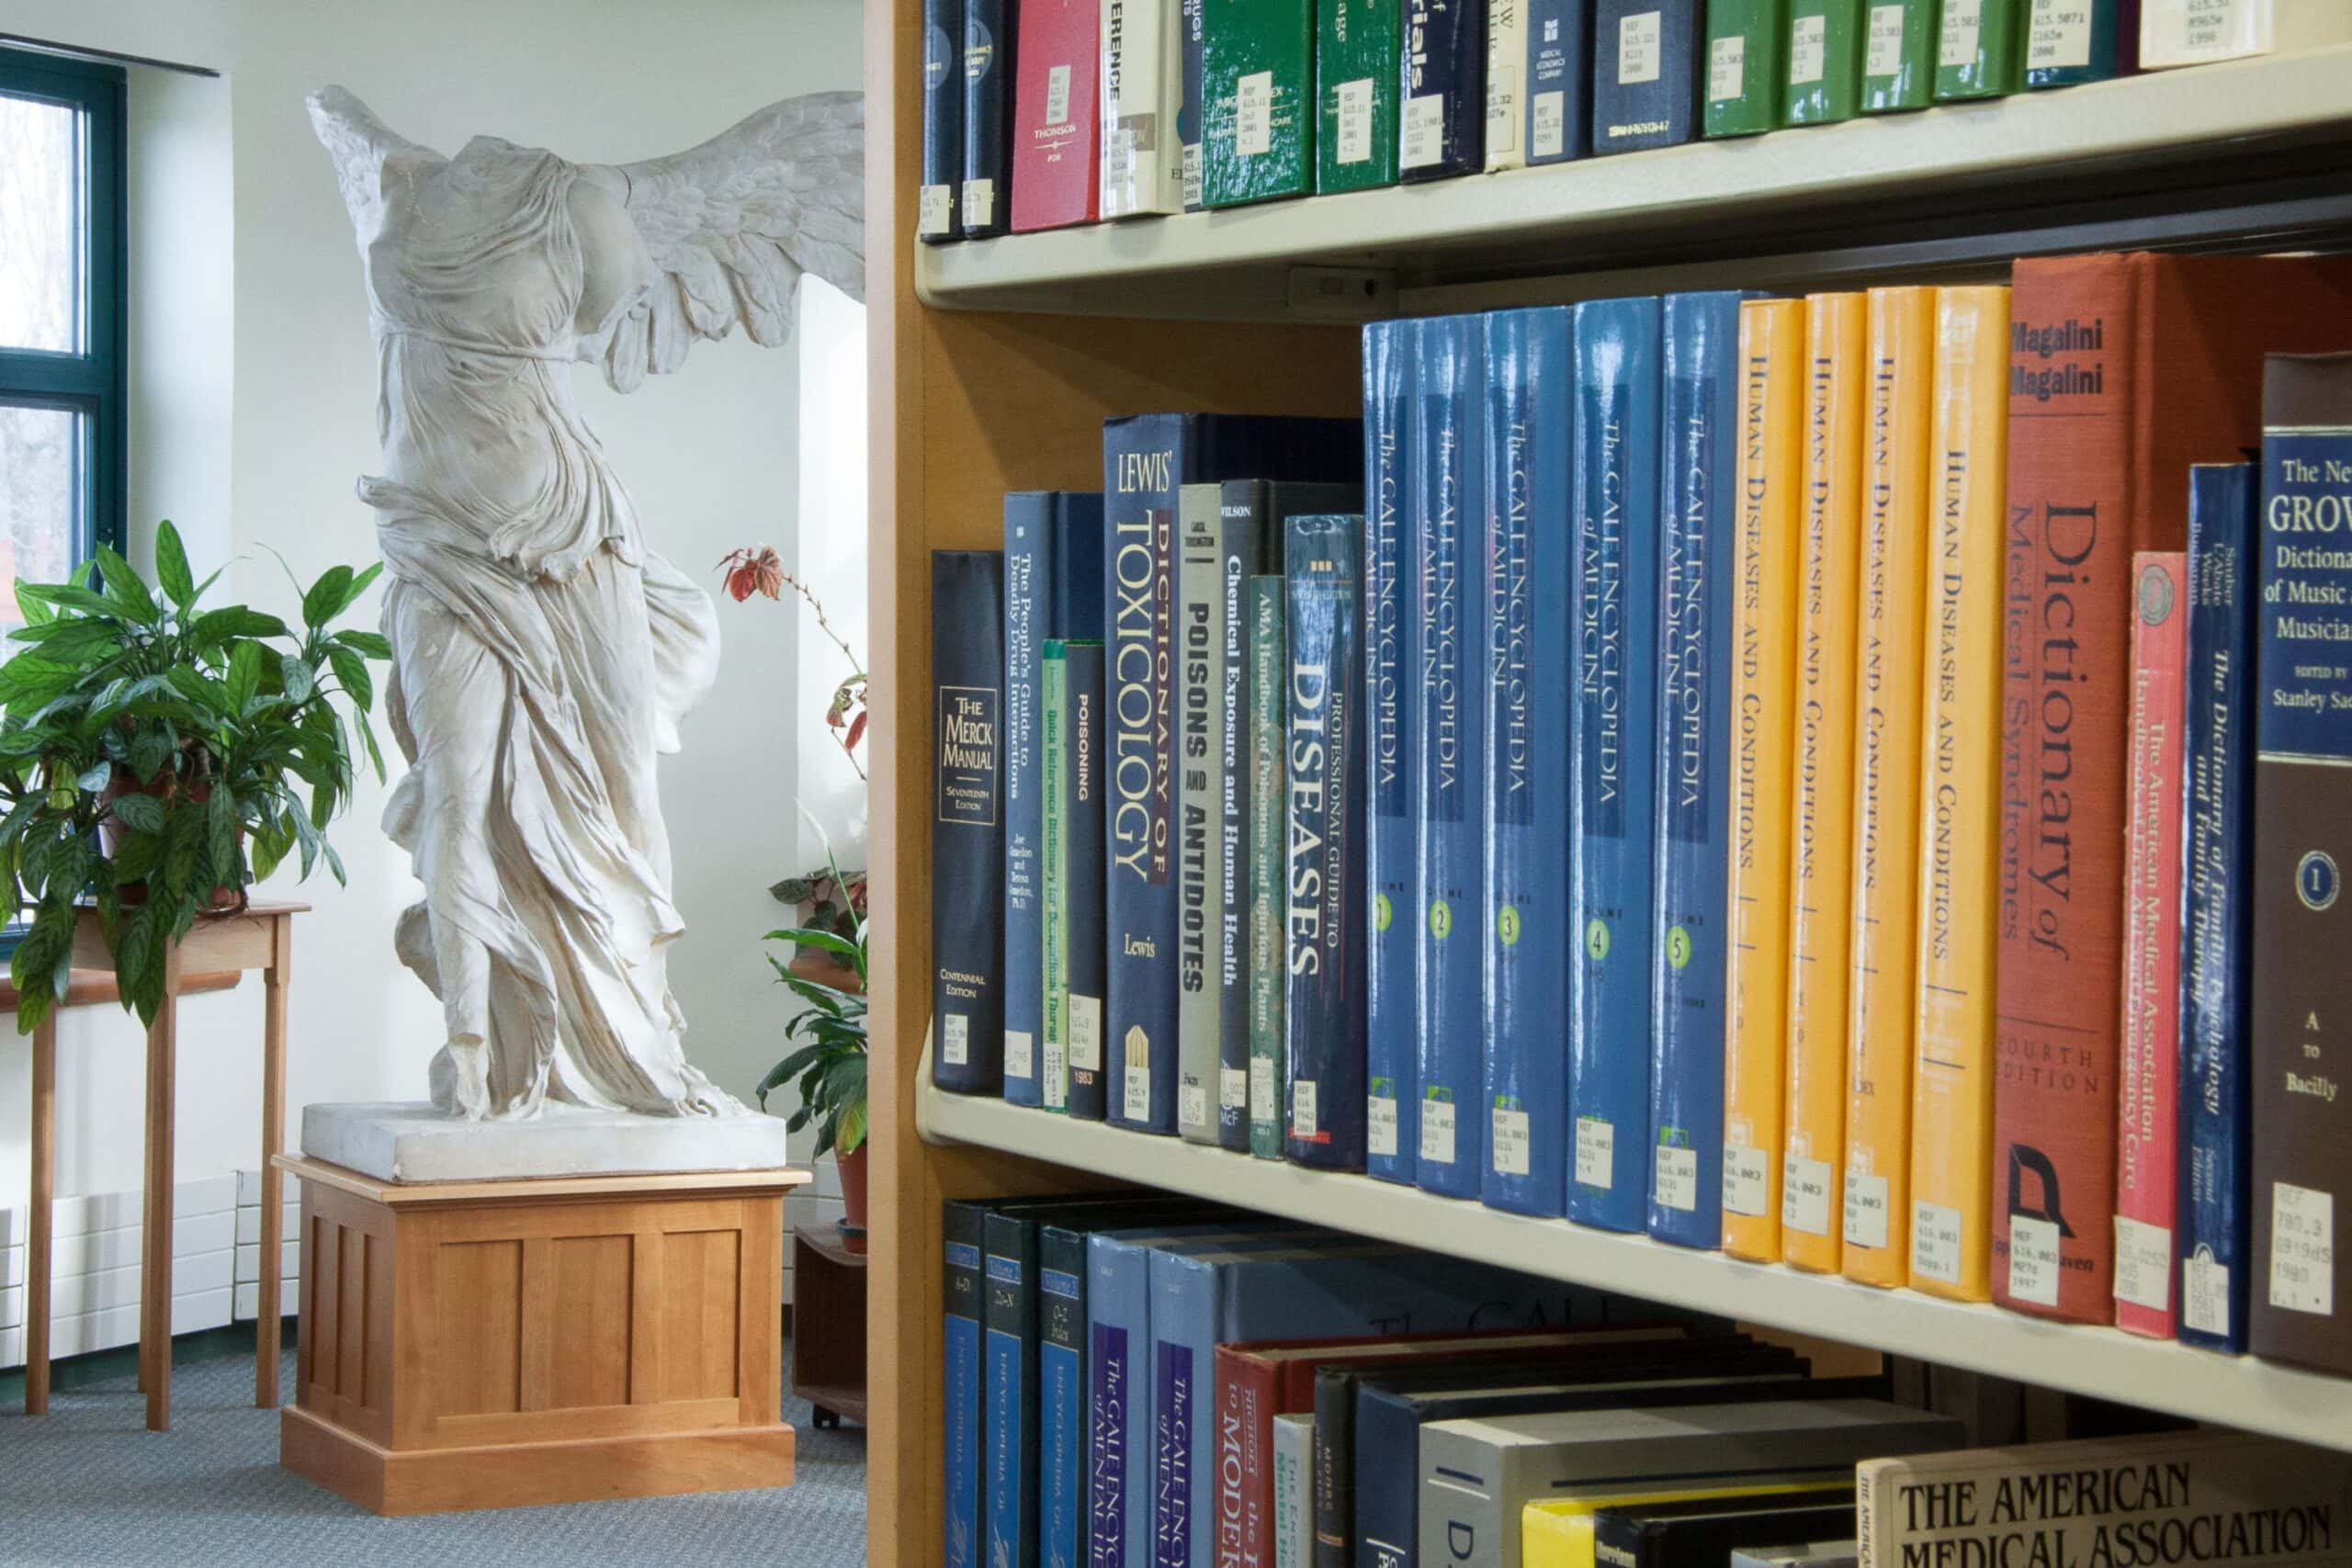 Bookshelves next to a Greek statue in the Lyndon campus library.